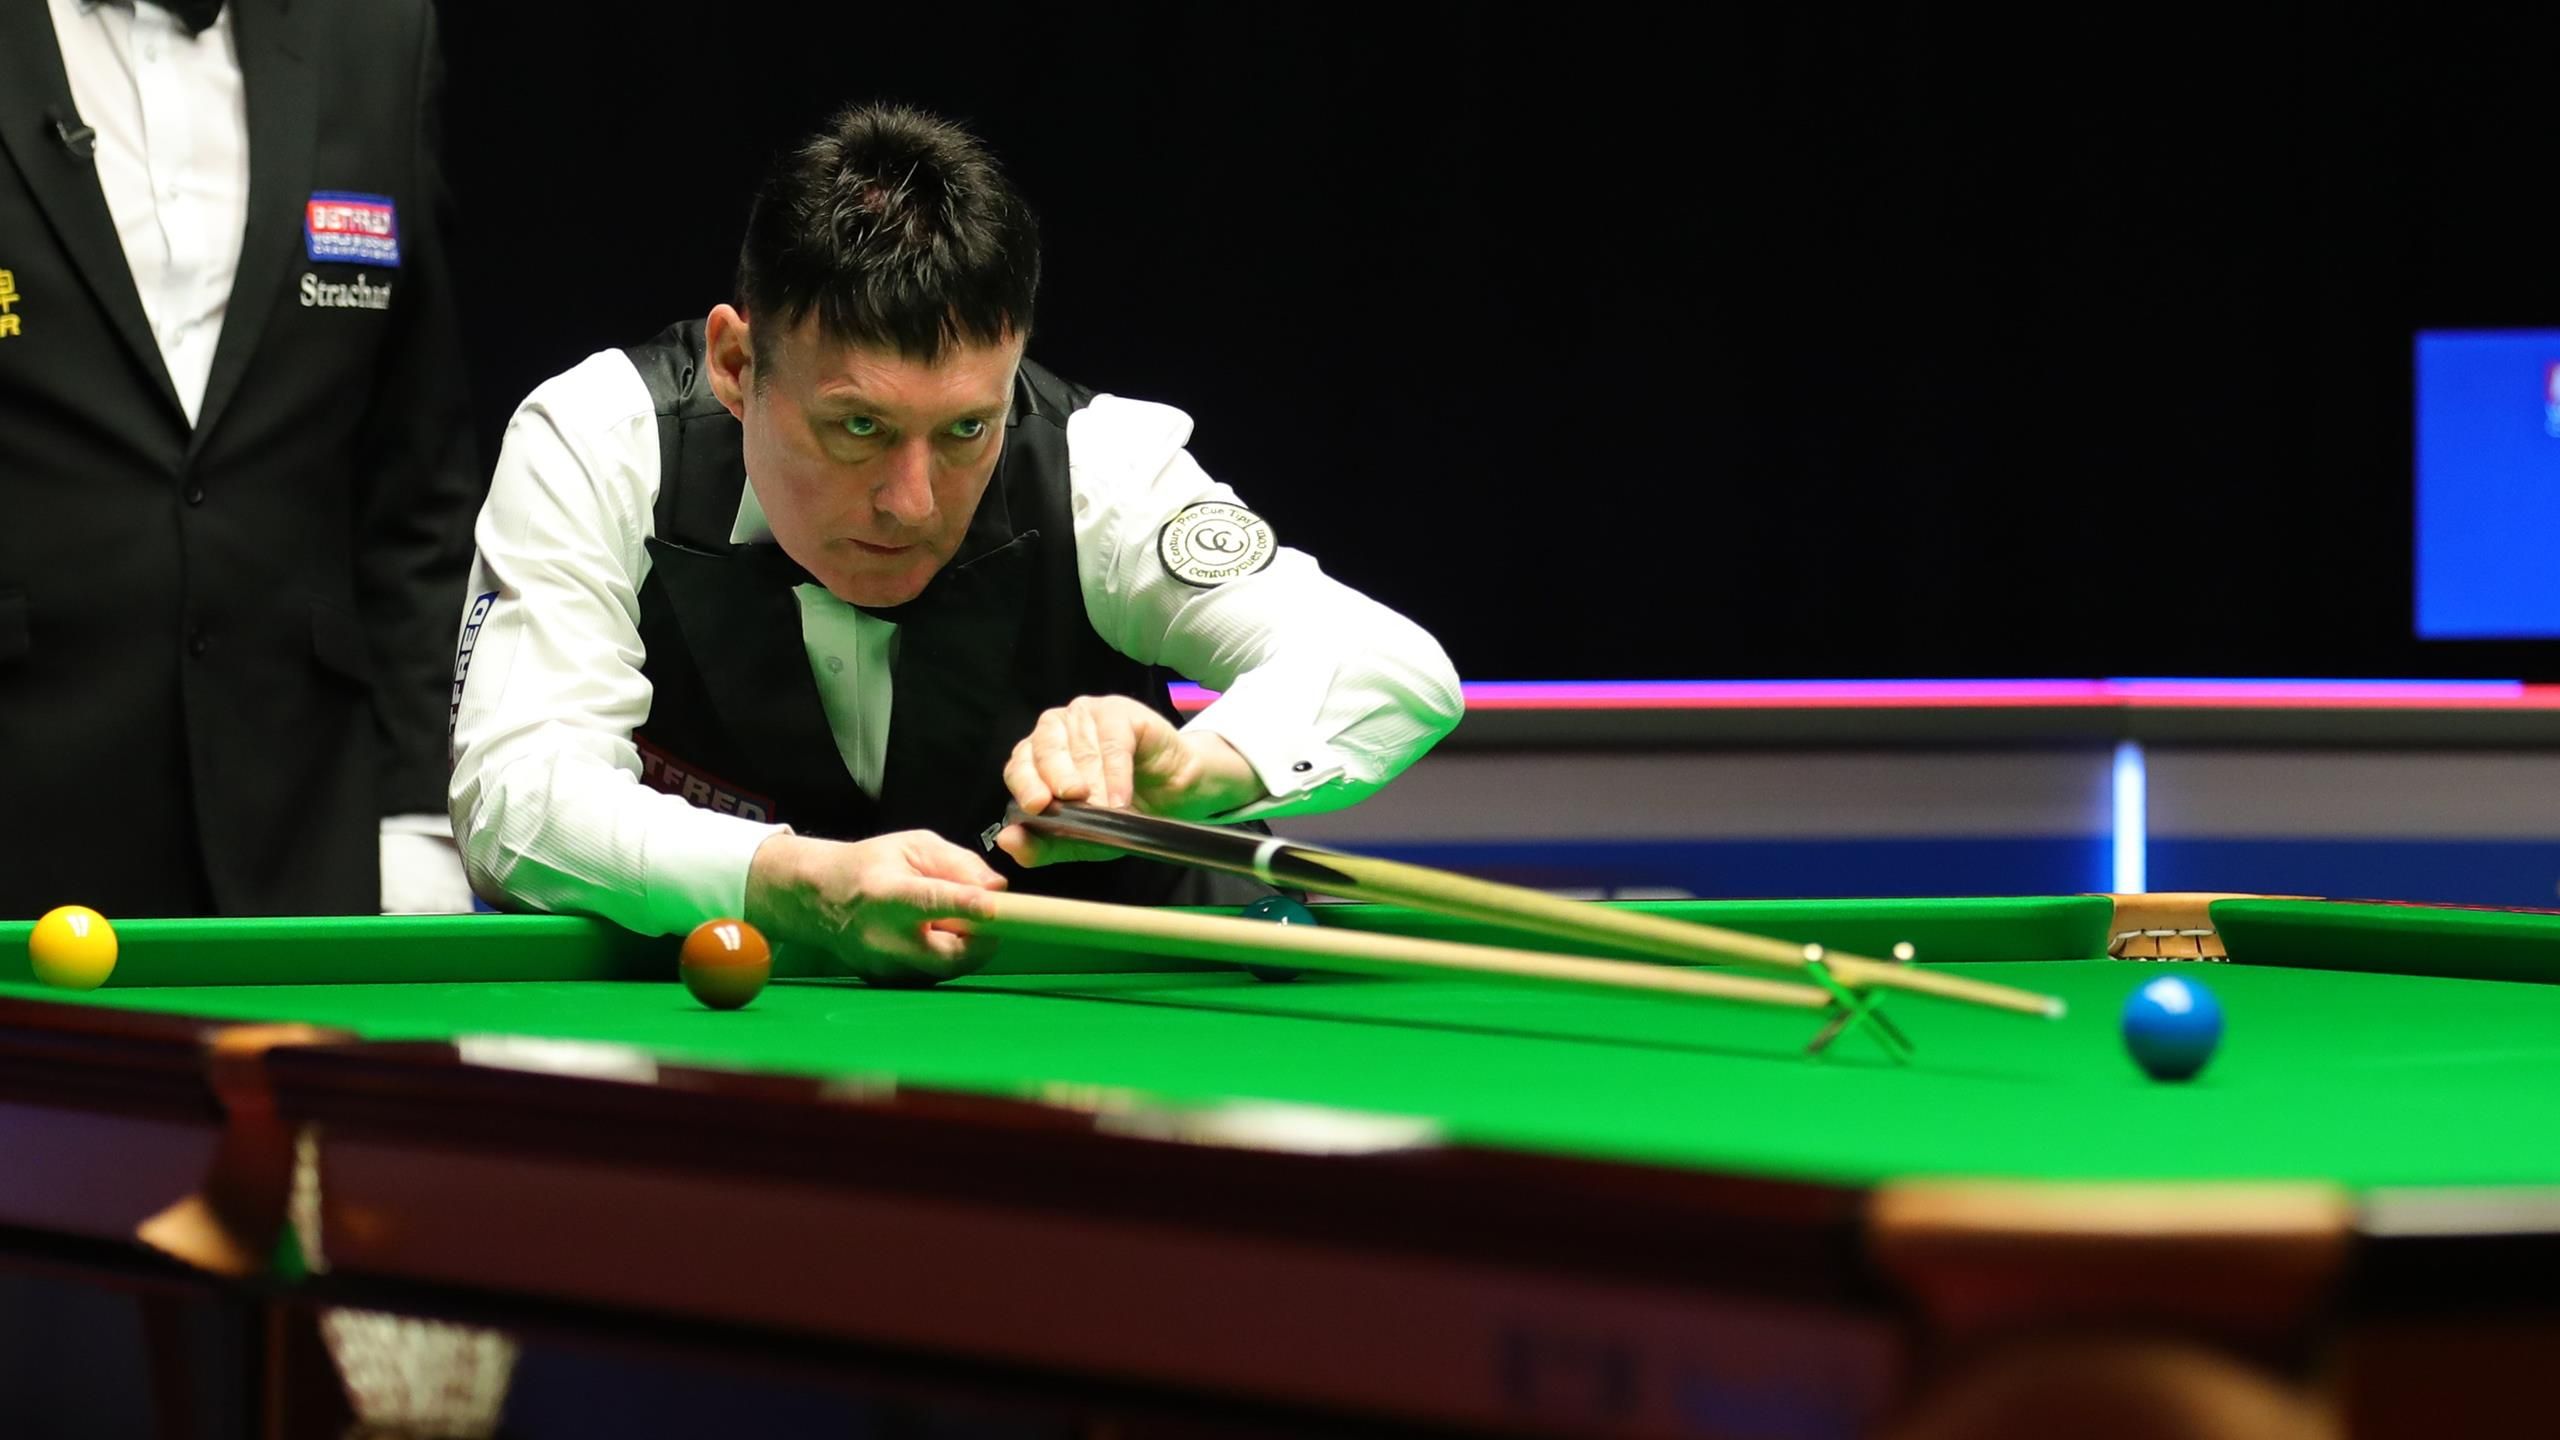 World Seniors Championship 2022 Schedule, results, order of play, live scores from the Crucible